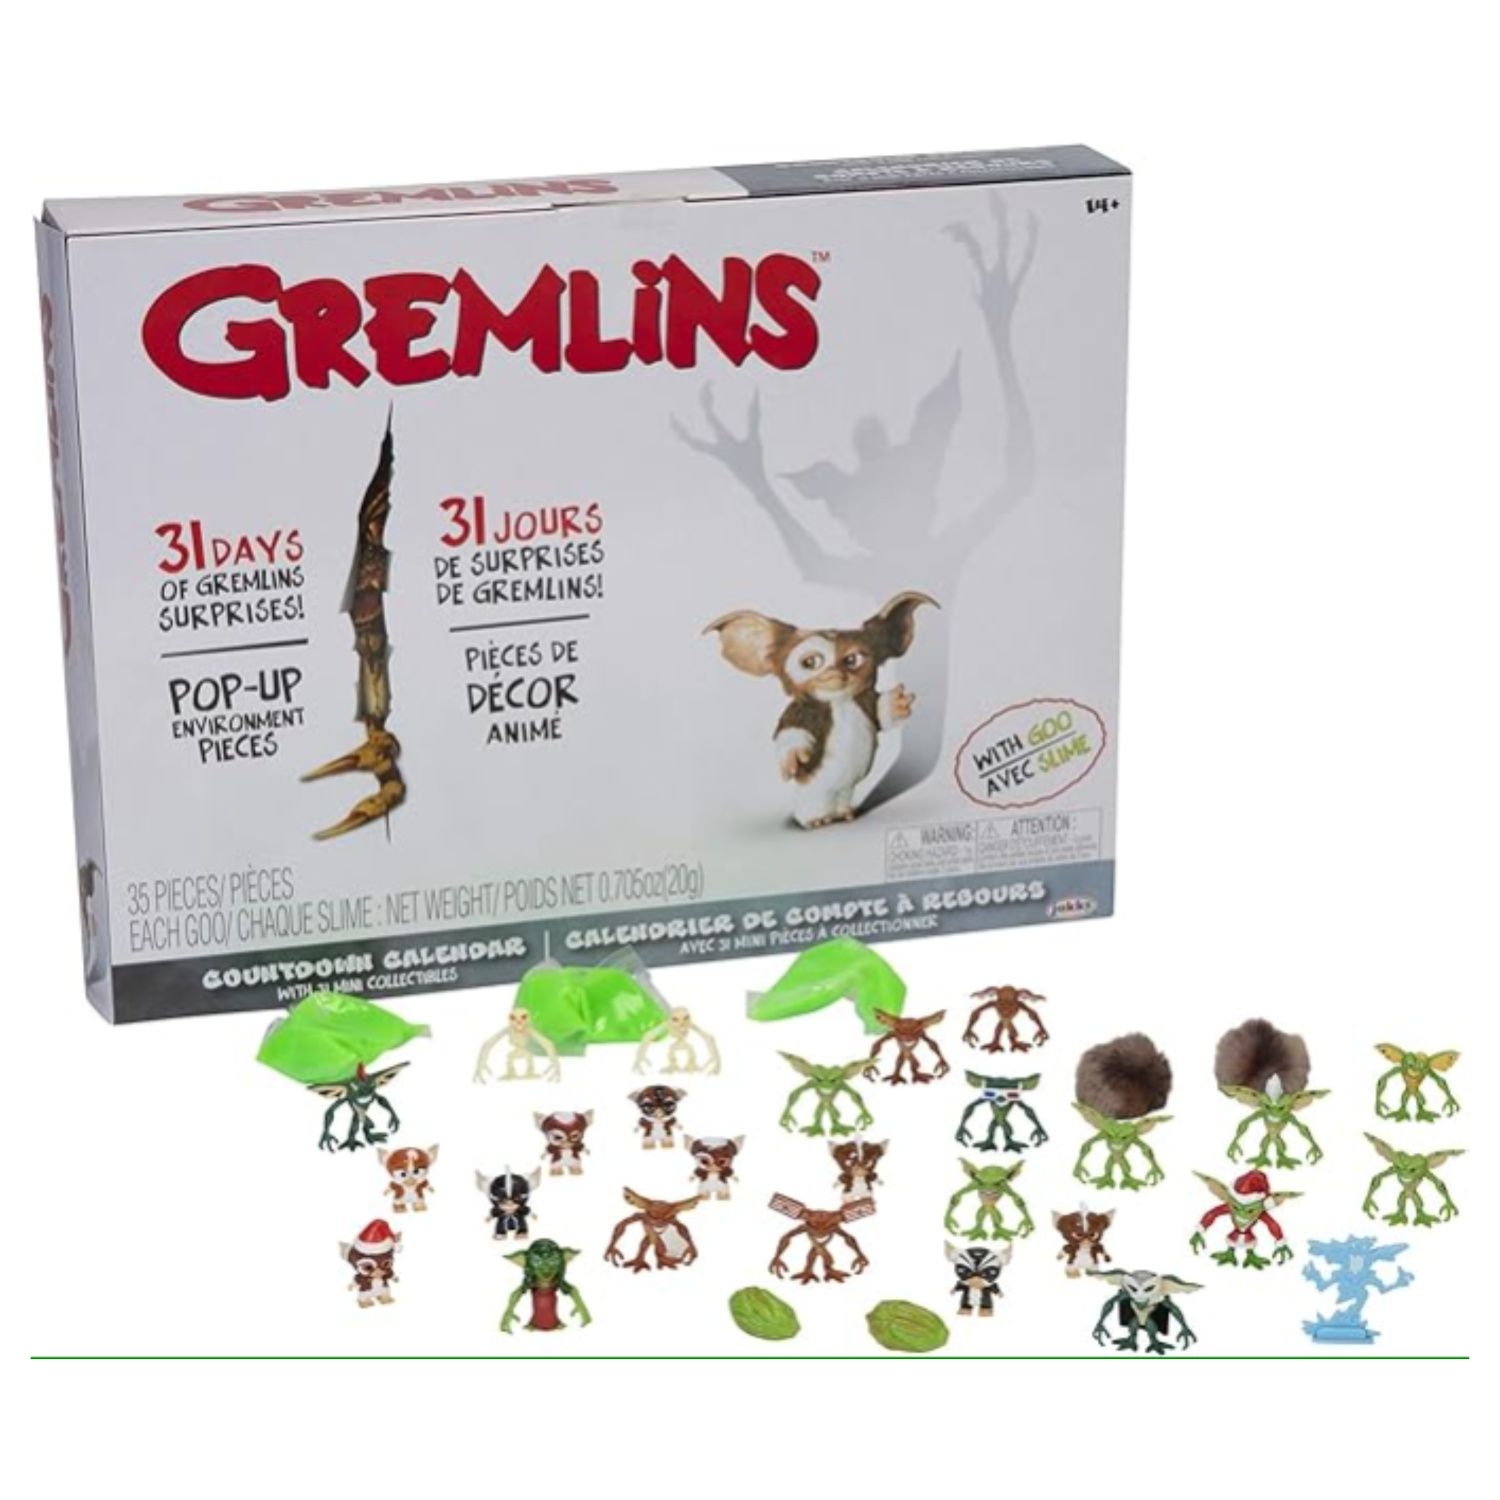 This image depicts the packaging and some of the contents of the Gremlins Advent Calendar